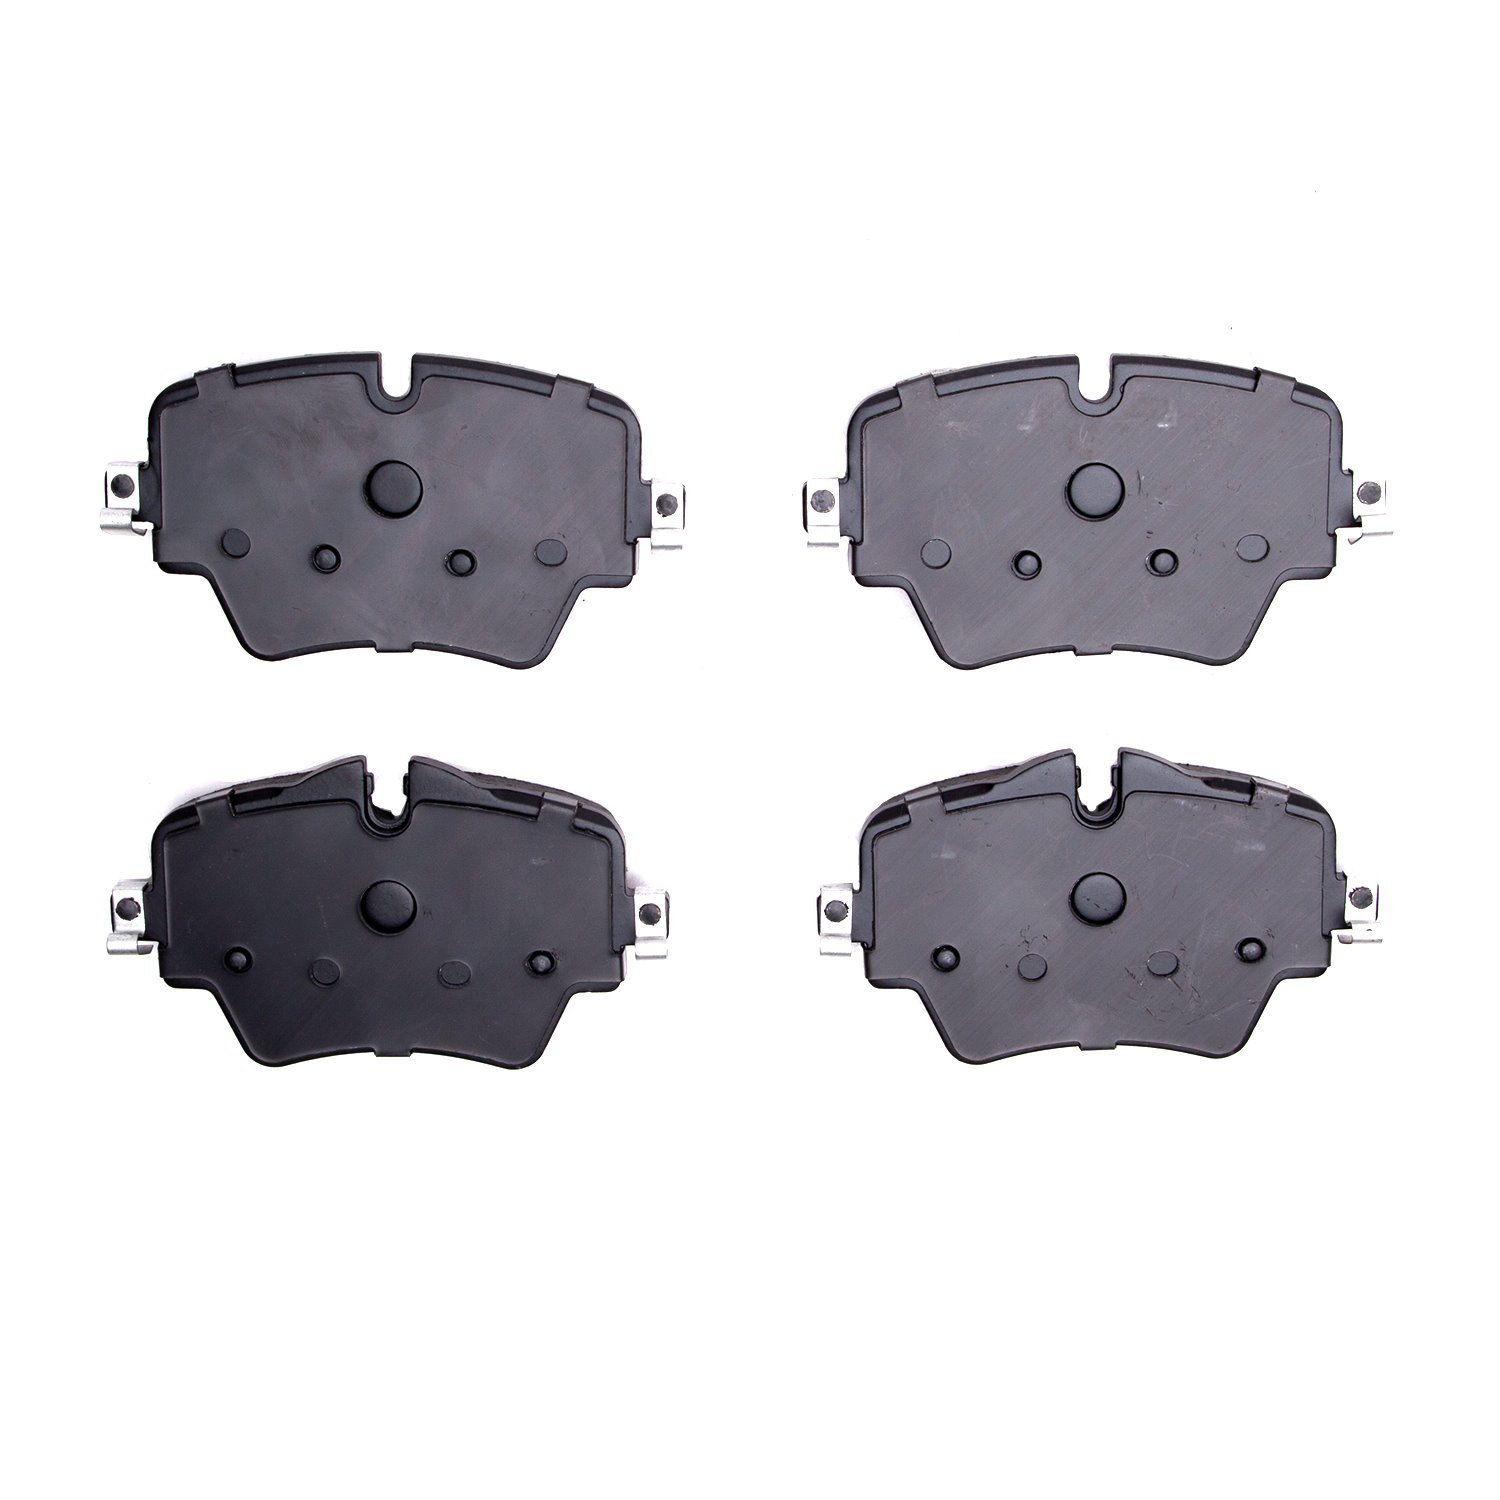 1310-1892-00 3000-Series Ceramic Brake Pads, Fits Select Multiple Makes/Models, Position: Front